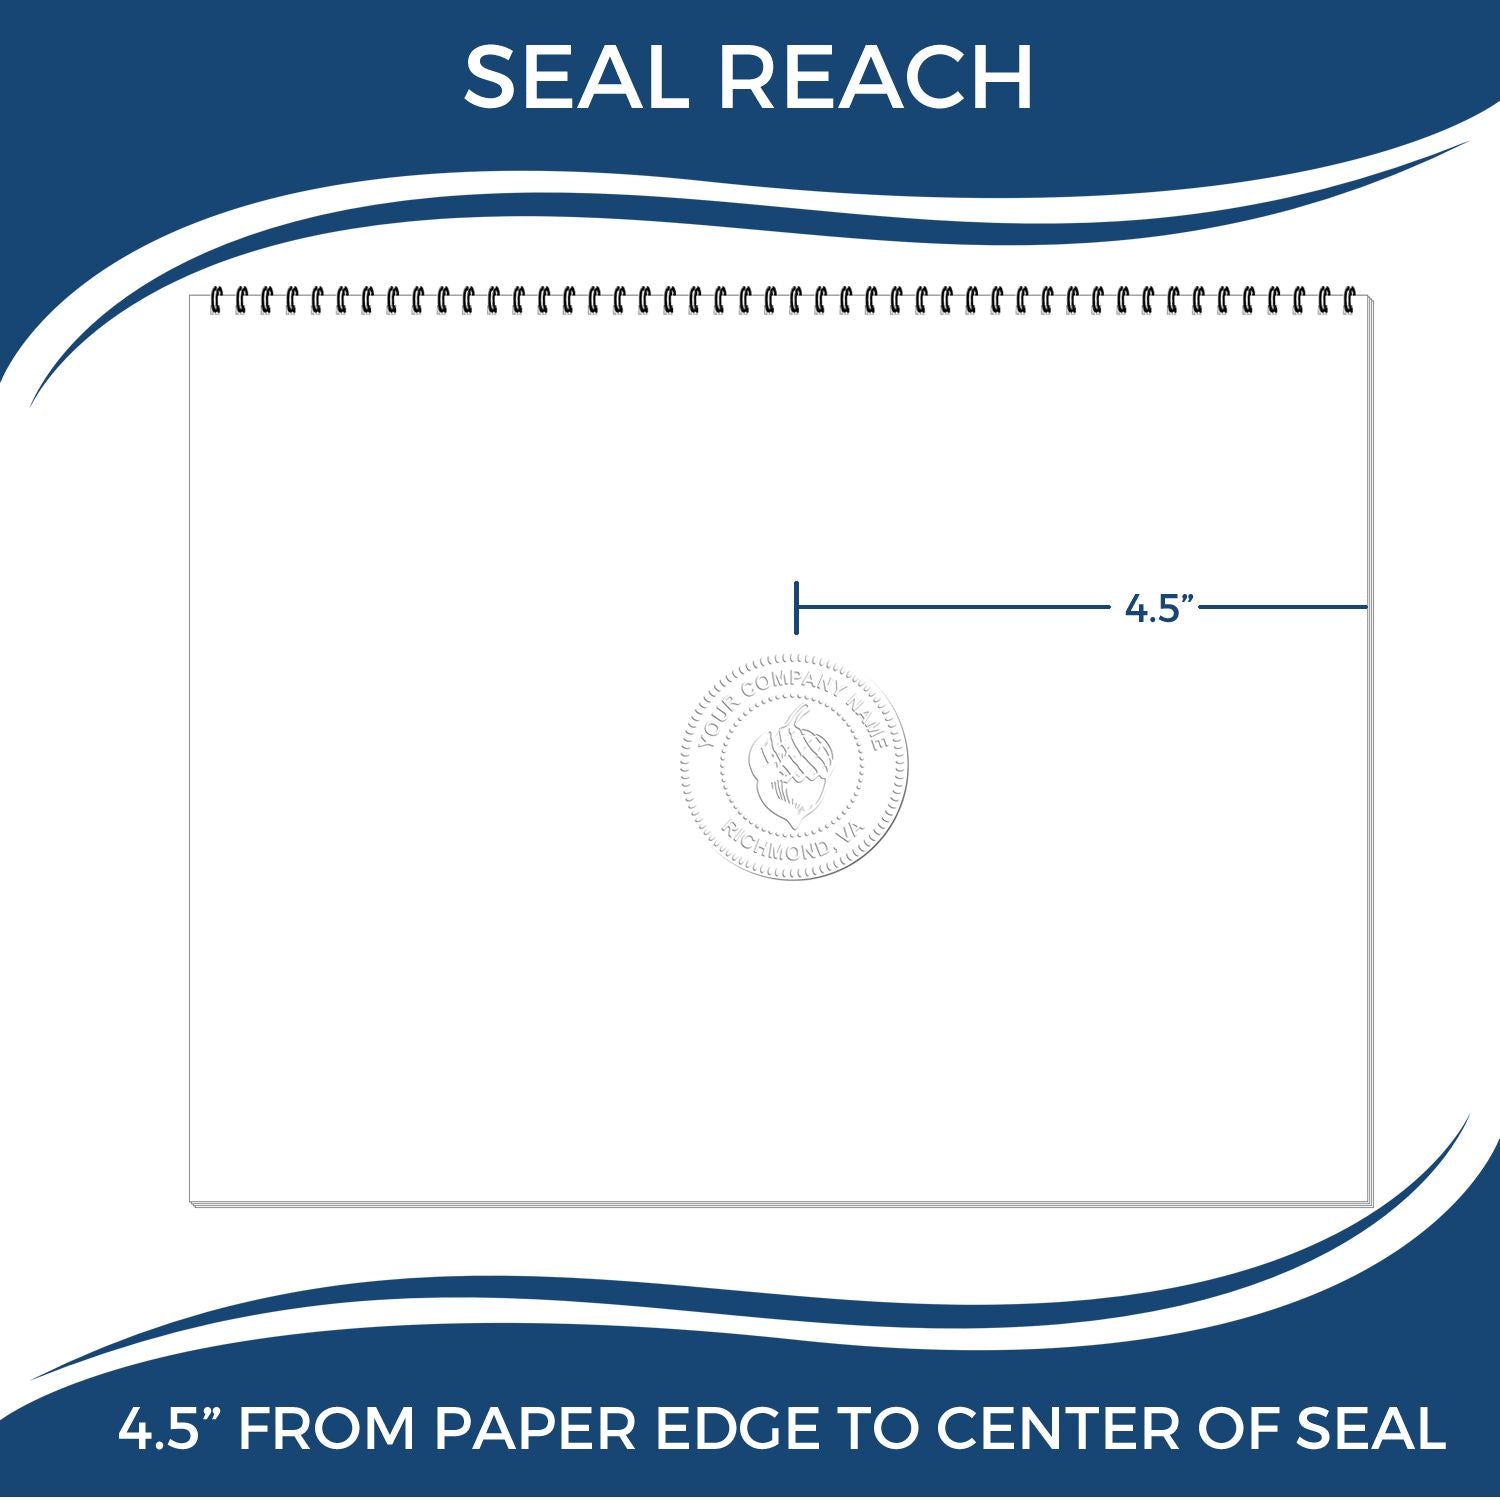 An infographic showing the seal reach which is represented by a ruler and a miniature seal image of the State of South Carolina Extended Long Reach Engineer Seal